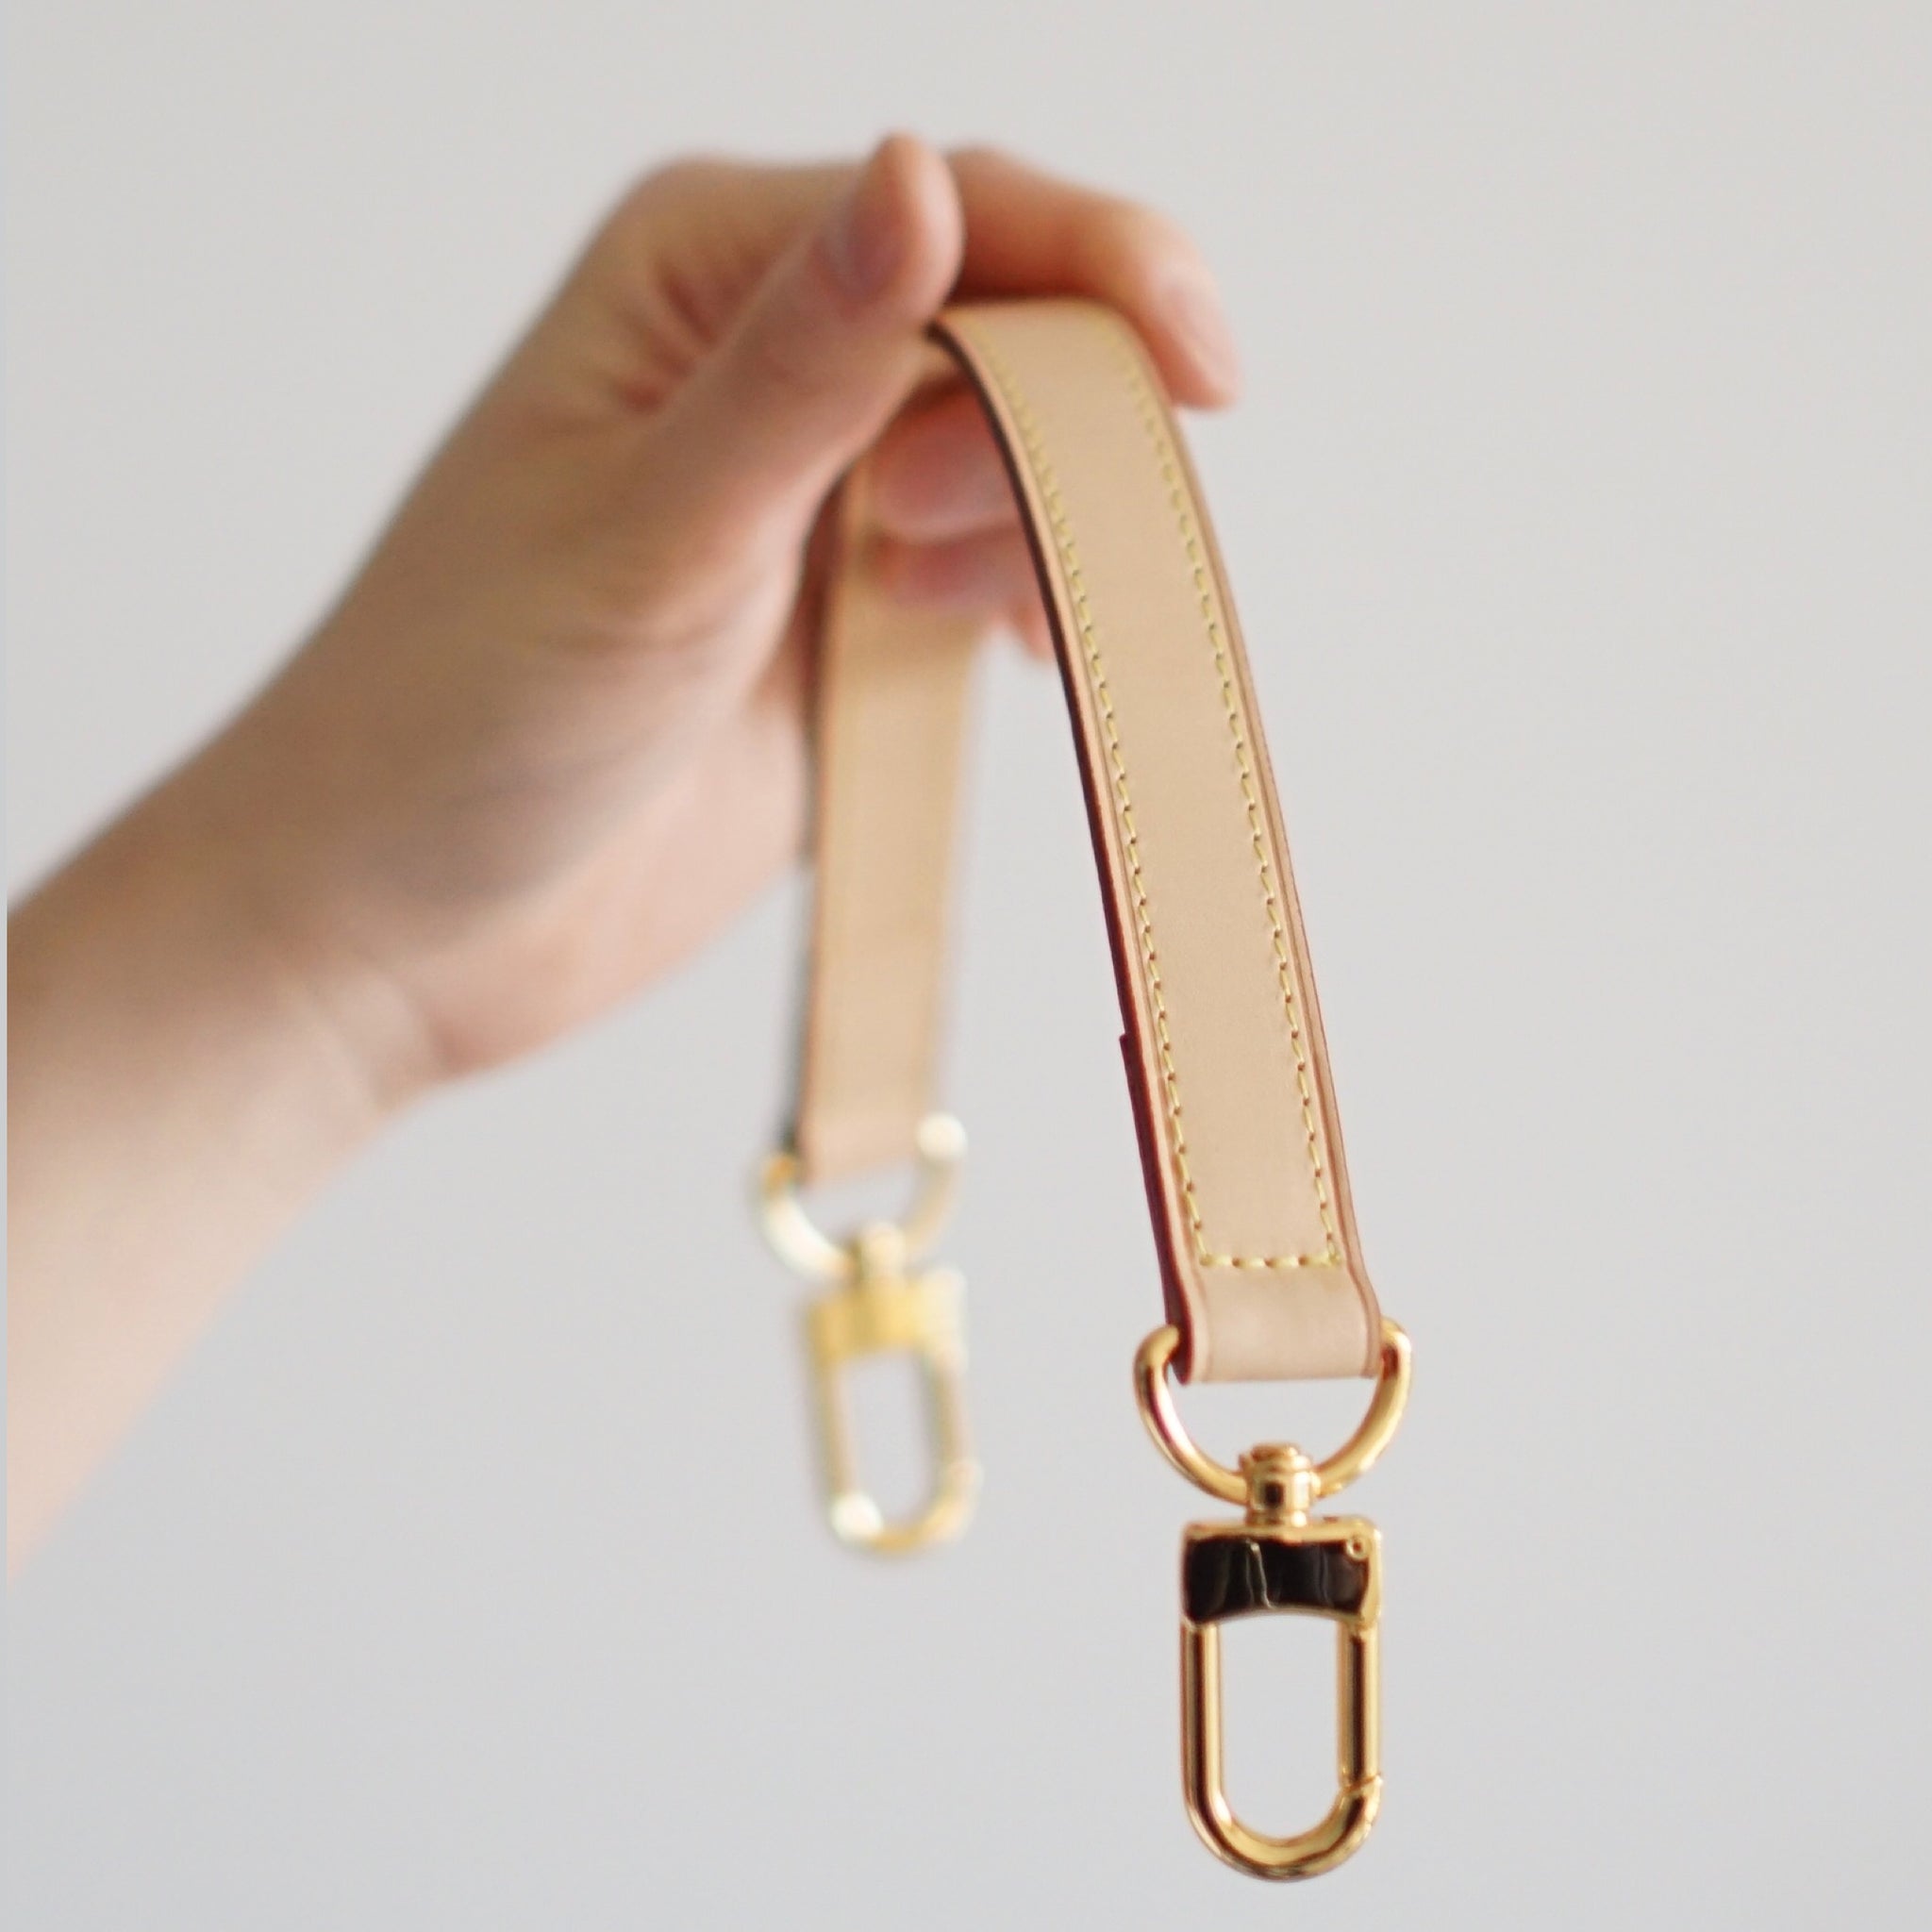 Shoulder Strap VVN Opinion? Would you recommend the adjustable? :  r/Louisvuitton